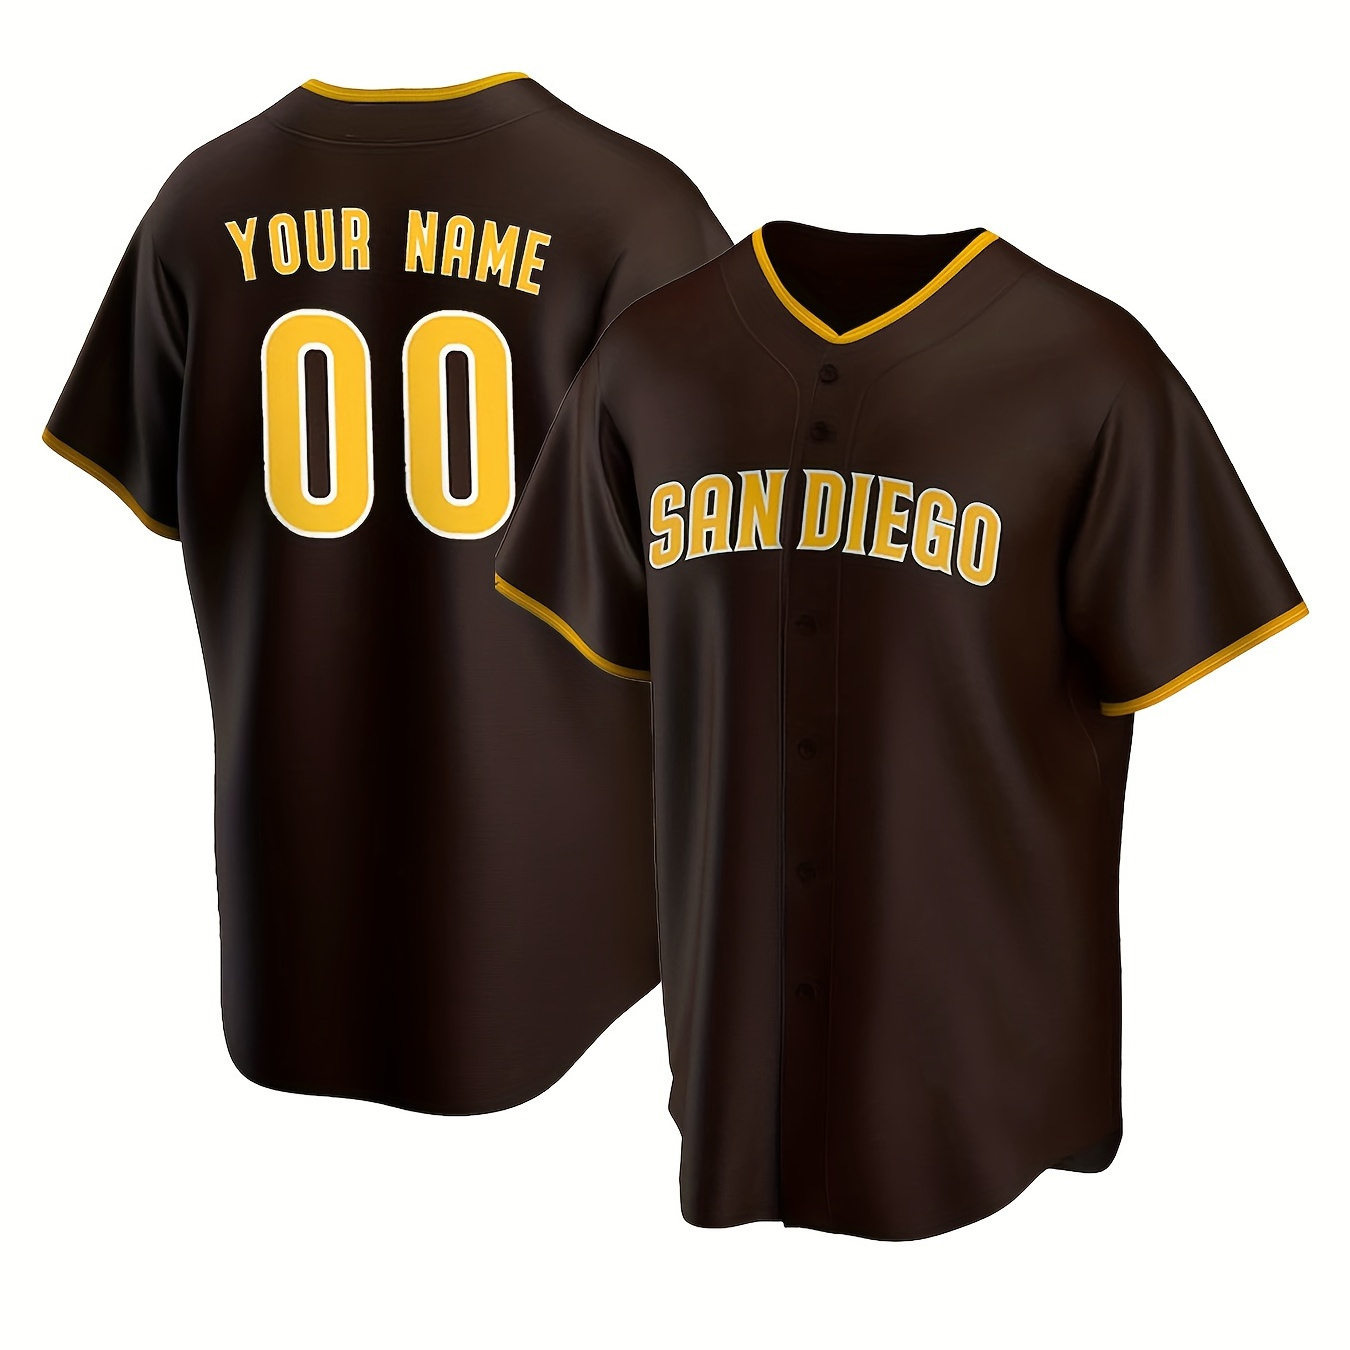 

Customized Name And Number Design, San Diego Embroidery Men's Short Sleeve Loose V-neck Baseball Jersey, Summer Party And Holiday